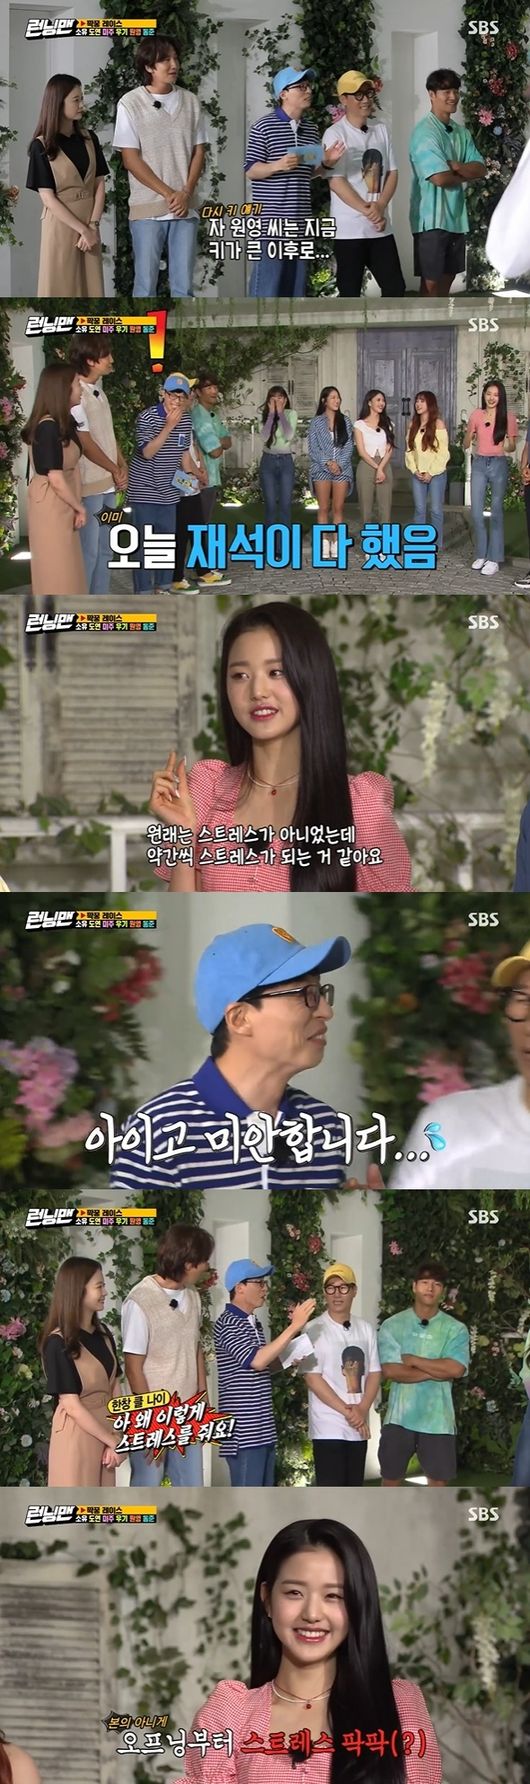 Running Man Jang Won-young is stressed on key questions, Confessions said.SBS Running Man, which was broadcasted on the afternoon of the 26th, was decorated with Pair Race, and guest Soyou, Wikimki Kim Do-yeon, Lovelys Miju, (girl) children Song Yuqi, IZ*ONE Jang Won-young and Kim Dong-jun appeared.Yoo Jae-Suk continued to talk individually one by one, introducing Soyou, Kim Do-yeon, Lee Mi-ju, Song Yuqi, Jang Won-young and Kim Dong-jun in turn.Jang Won-young, a girl group IZ*ONE, was born in 2004 and is the youngest, but he is the longest among guests. He is already over 170cm.Yoo Jae-Suk said, How tall was Won Young in a year you have not seen?I asked, and Jang Won-young replied, It was two to three centimeters bigger than when I met Park Jae-seok at the end.Around, he said, Gagwoman Jang Doyeon should be nervous; in profile, Jang Doyeon is 174cm tall.At this time, Lee Kwang-soo said, Honestly, I am nervous, I am nervous. Yoo Jae-Suk laughed at the knife.Yoo Jae-Suk said, Does Won Young not get stress because he has been tall around since he was tall?I asked, and Jang Won-young said, I originally heard so much about that that that was not a stress, but it is becoming a little stress. Jang Won-young also said, Is it still big? And It seems bigger ~.Park Jae-seok told me everything today, he laughed at the fact violence.Yoo Jae-Suk immediately apologized for being sorry, while Lee Kwang-soo begged, Why are you giving me this stress?The ending fairy Jang Won-young caught the eye by showing a full-fledged expression of IZ*ONEs fantastic fairy tale.On this day, Jang Won-young paired Lee Kwang-soo and performed mission.Asked about the role model, he said, I like Jun Ji-hyun, and Yoo Jae-Suk said, I used to shoot an advertisement once, and Jun Ji-hyun can not call it.I can not get out, he said, revealing the top stars depression and laughing.Running Man screen captures